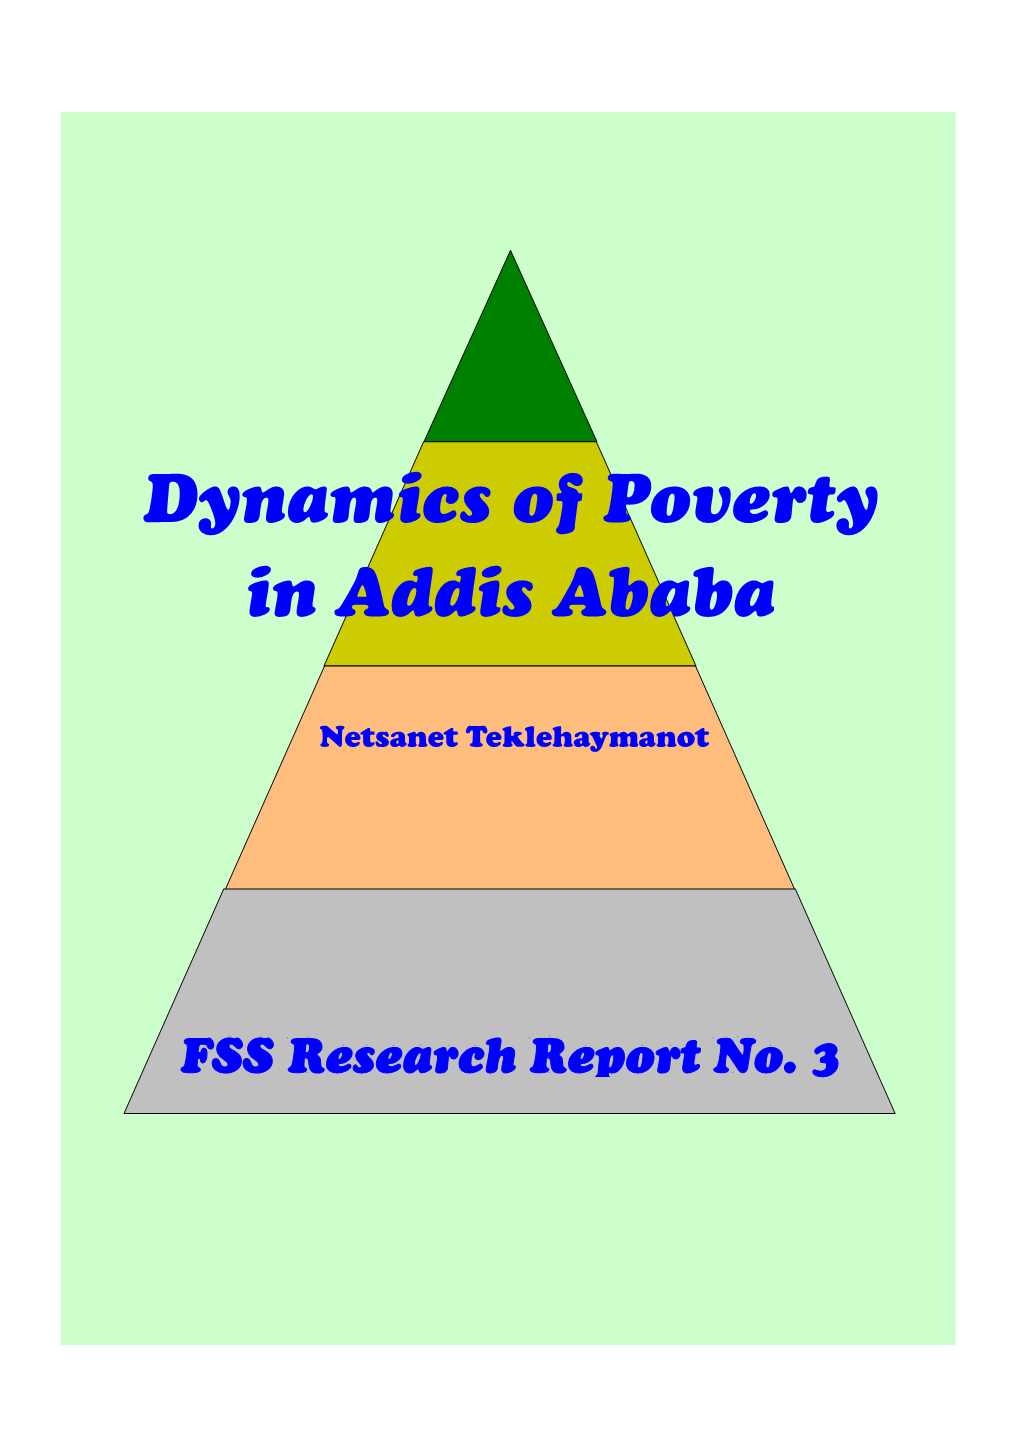 Dynamics of Poverty in Addis Ababa